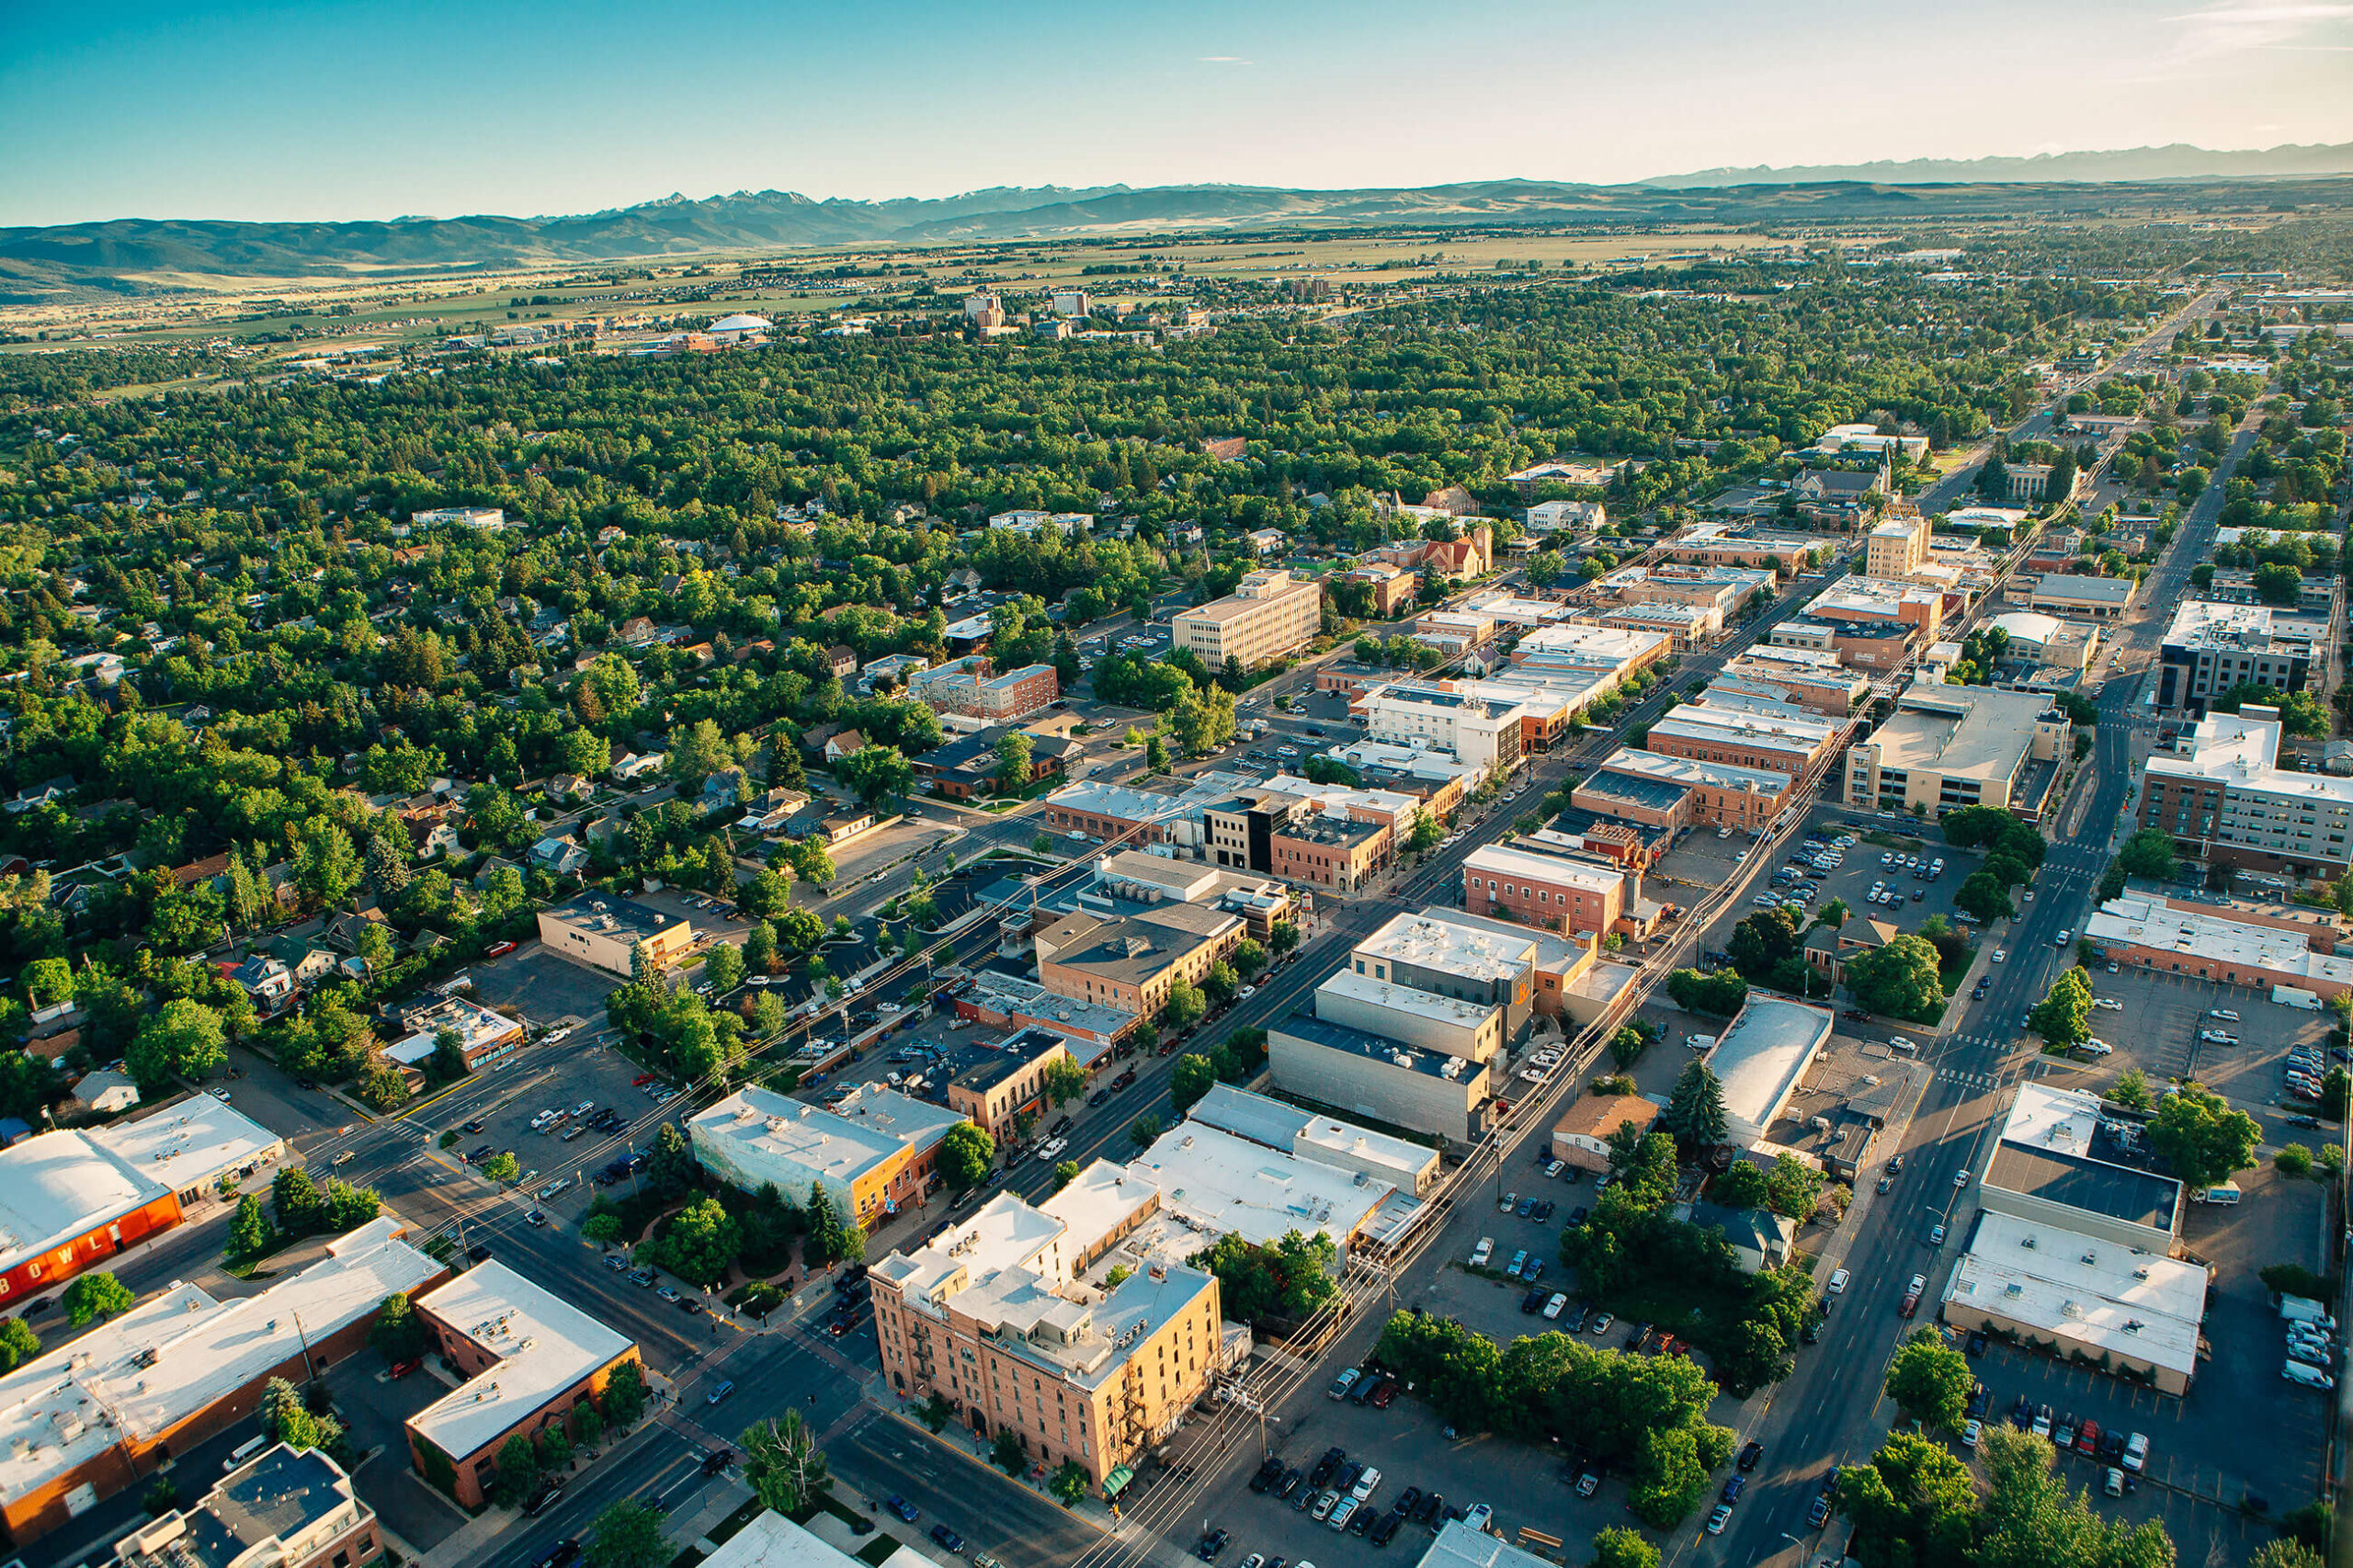 An aerial view of a town in colorado.